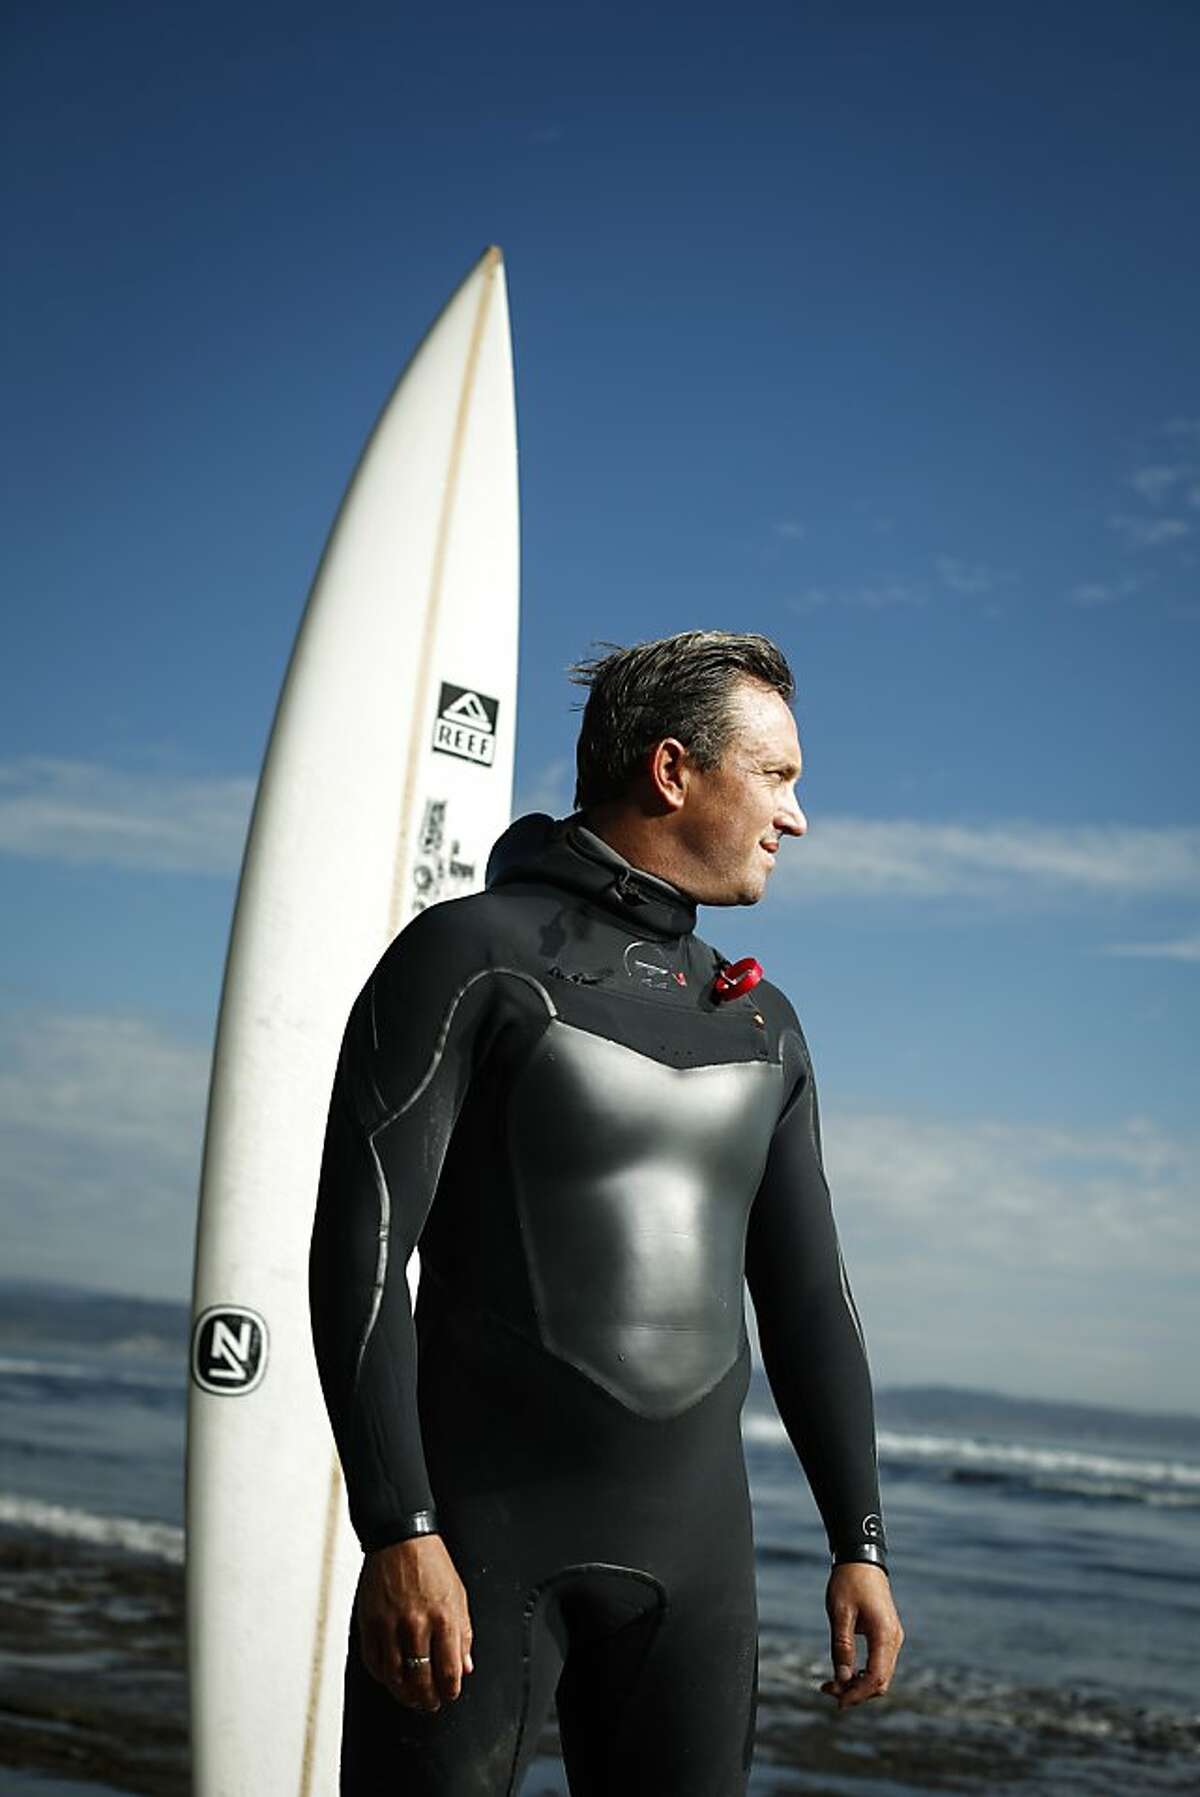 Shawn Dollar is seen at a beach in Santa Cruz, Calif., on Tuesday, Nov. 12, 2013 with the board he rode catching a record 61-foot wave at the Cortes Bank.